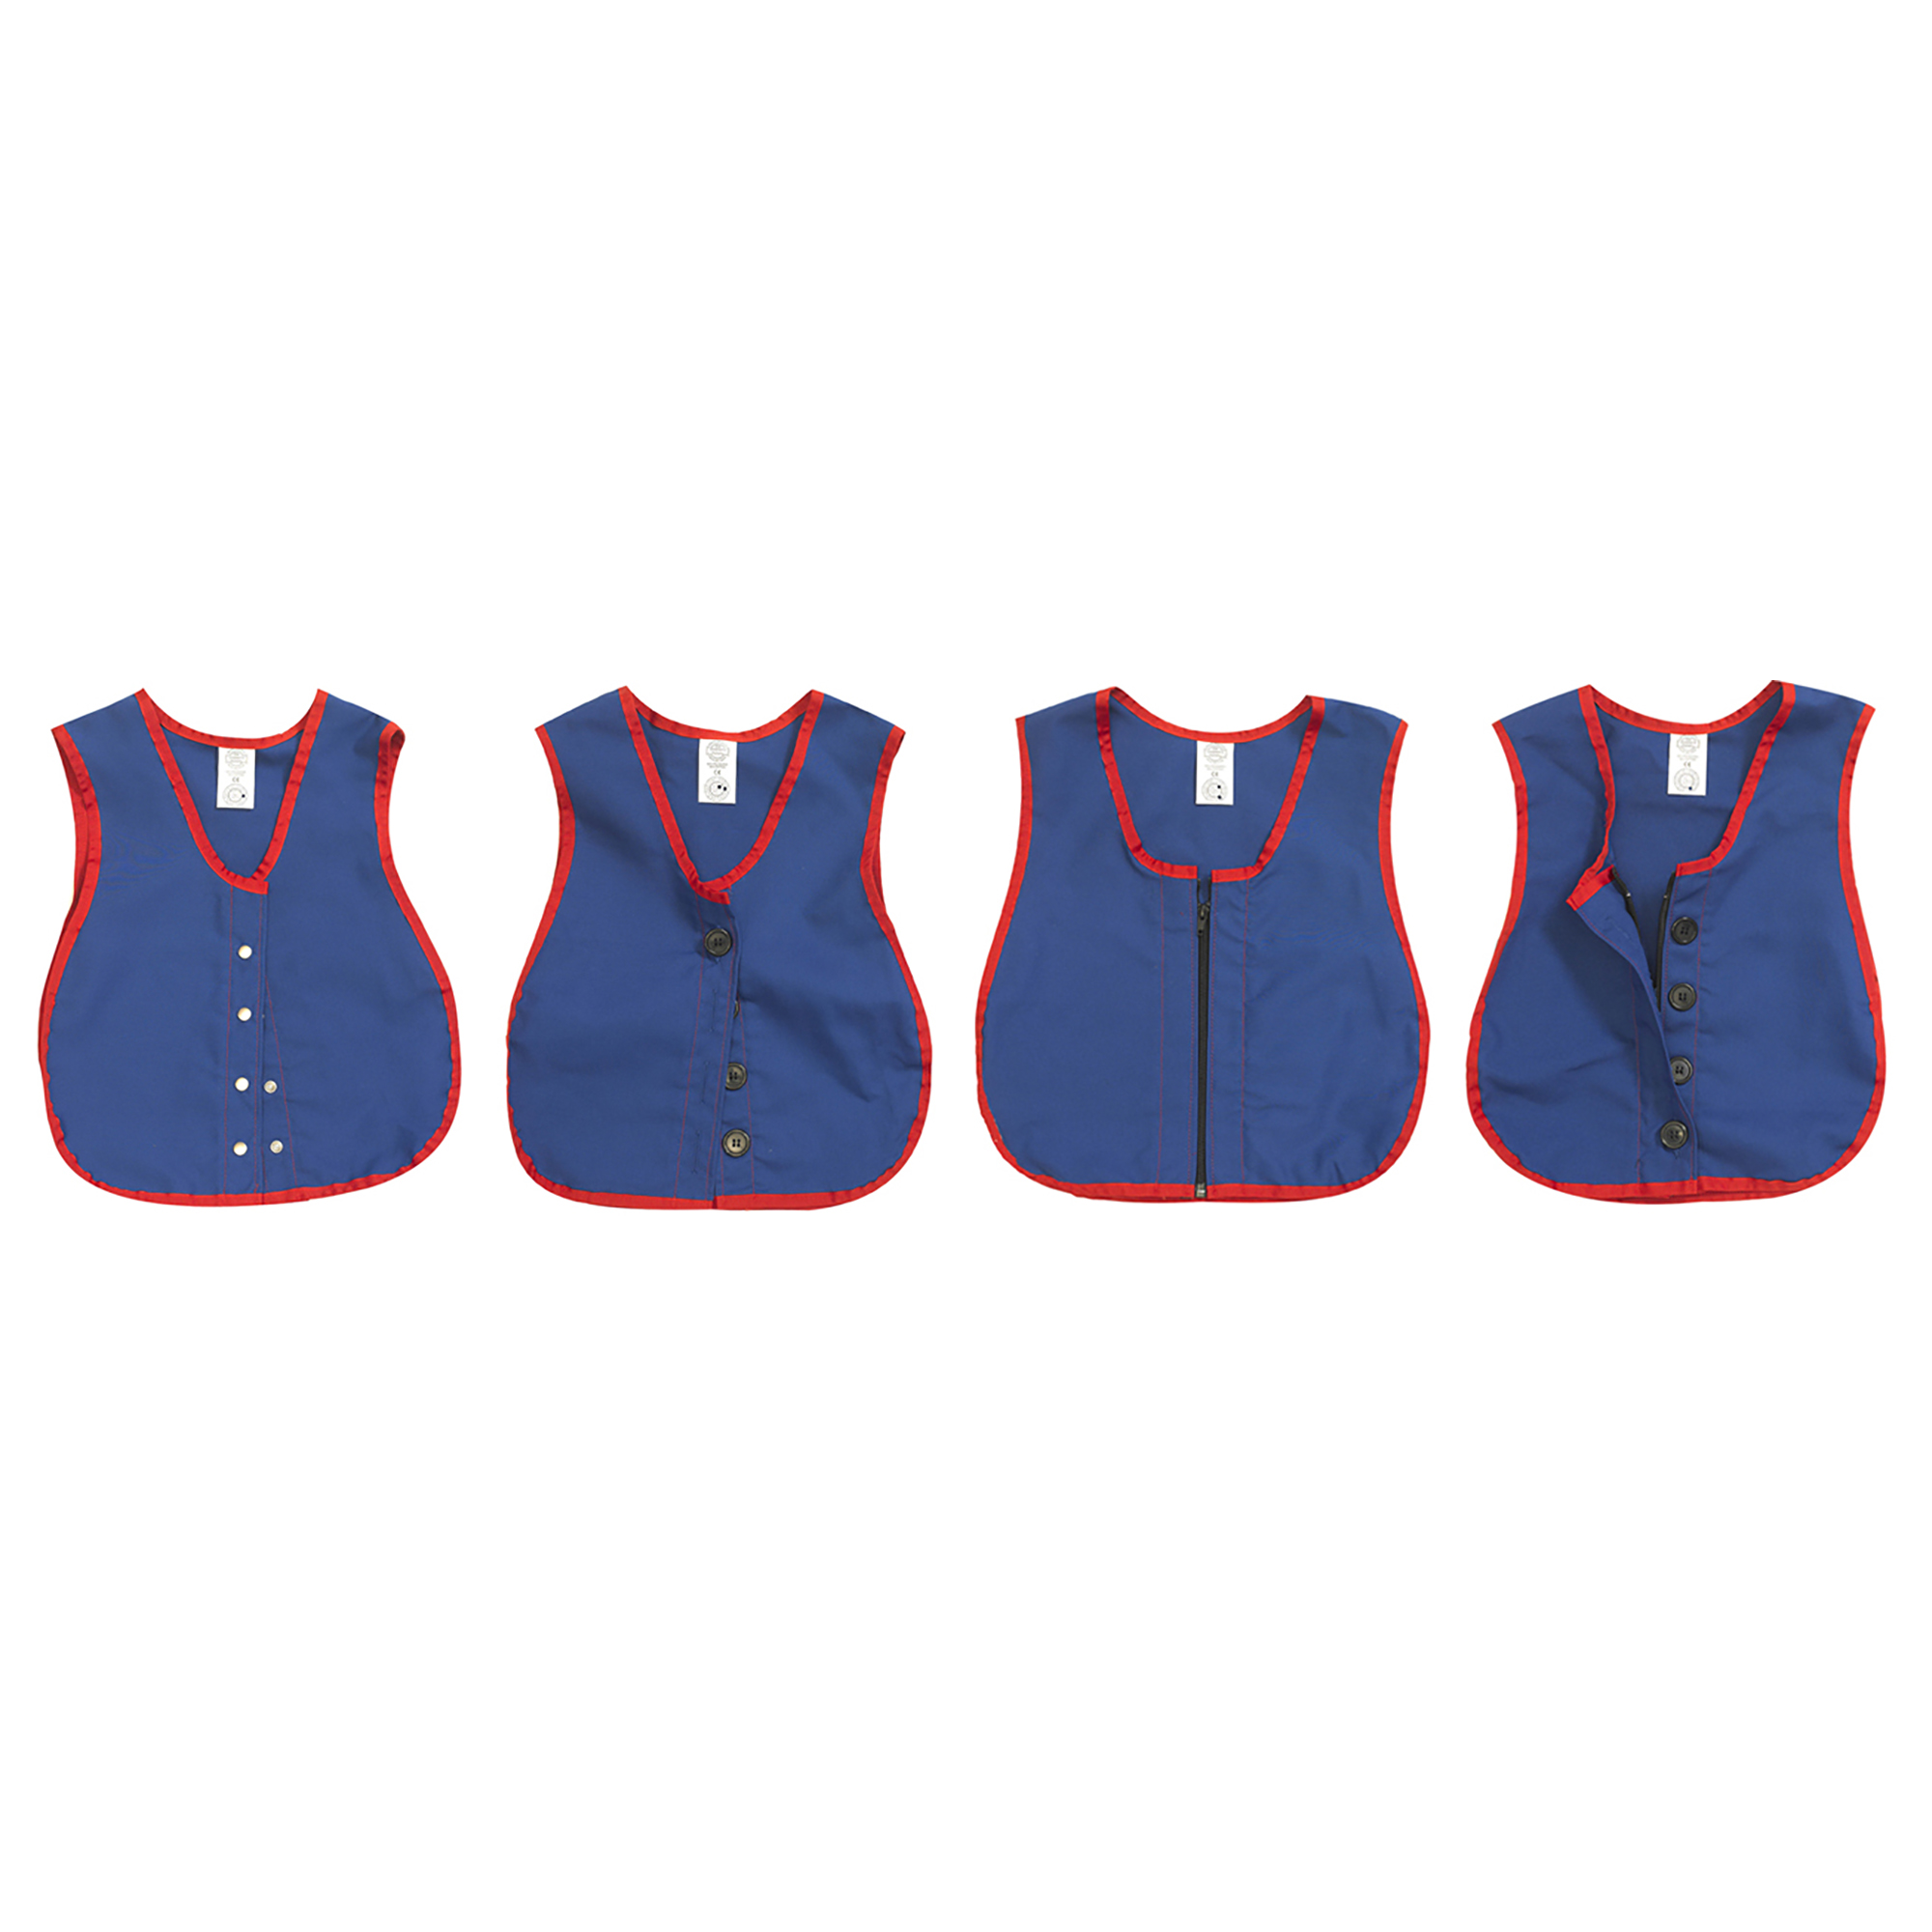 Manual Dexterity Learning Vests - Set of 4